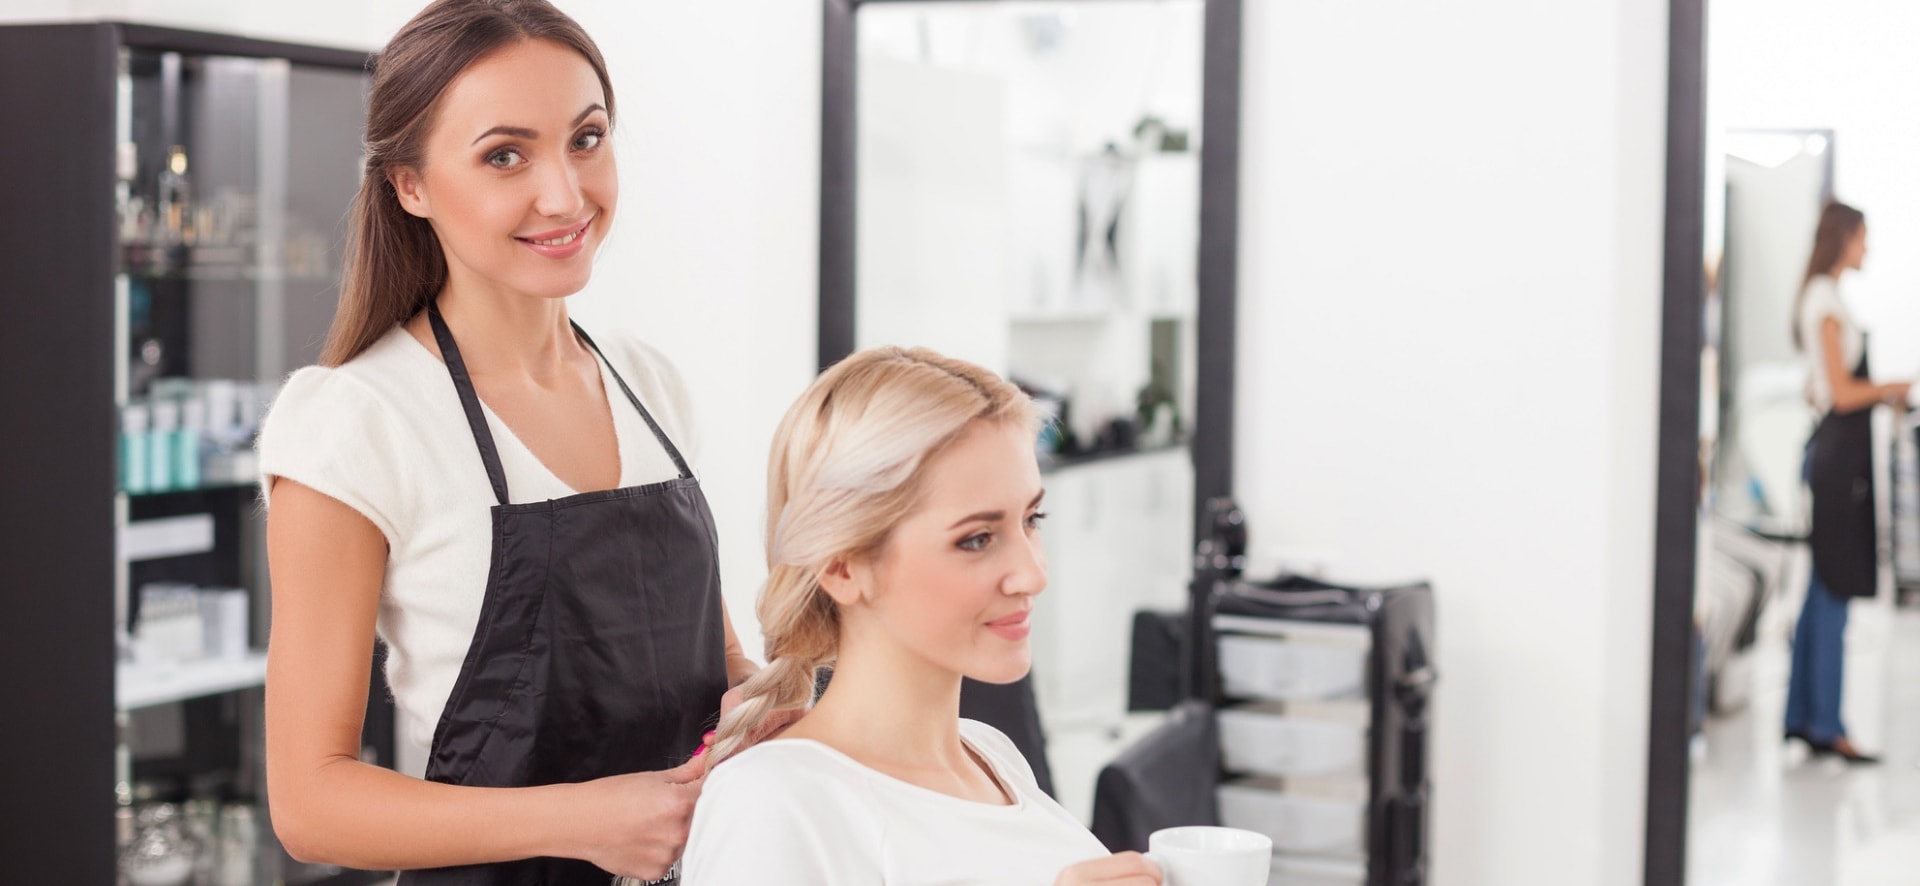 Looking for the Best Hair Salon in Toronto (or the GTA): Prive Hair Gallery!